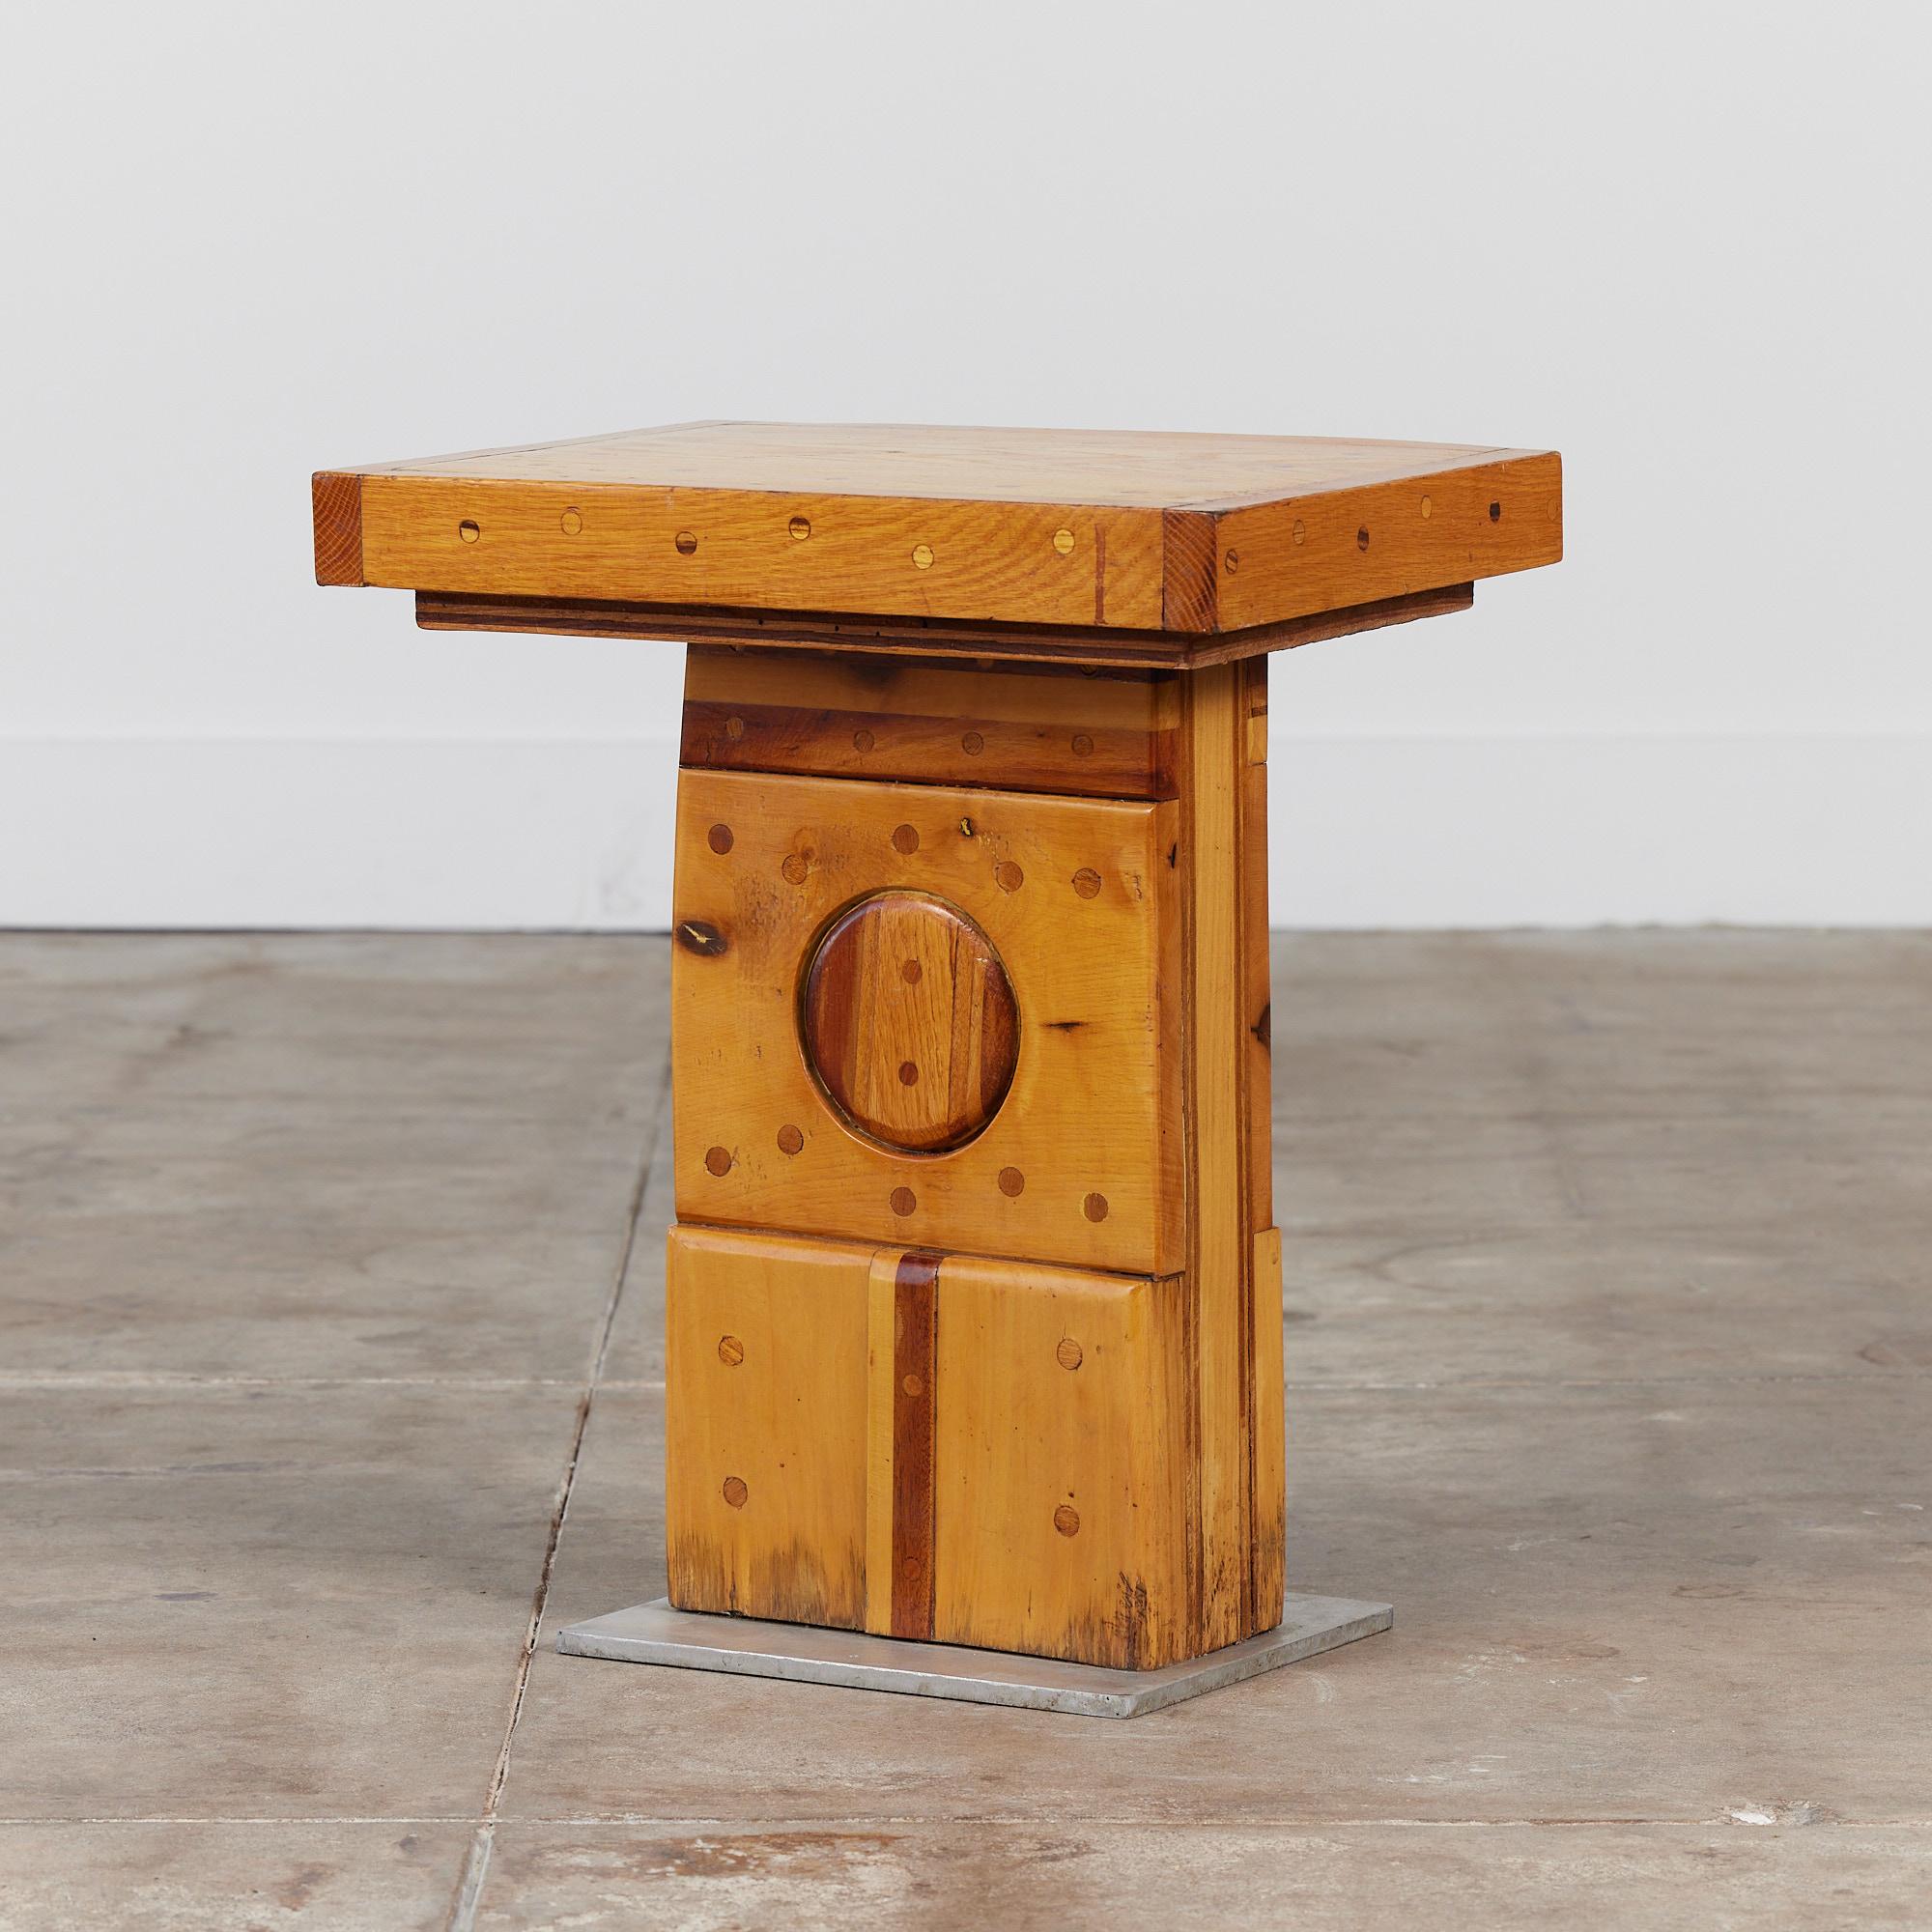 Pedestal side table by Ed Hart, circa 1970s, California. Ed, a sculptor from Newport Beach, California, created this unique pedestal side table, with many geometric sculptural elements. The mix of oak and pine offer varying depths in coloring